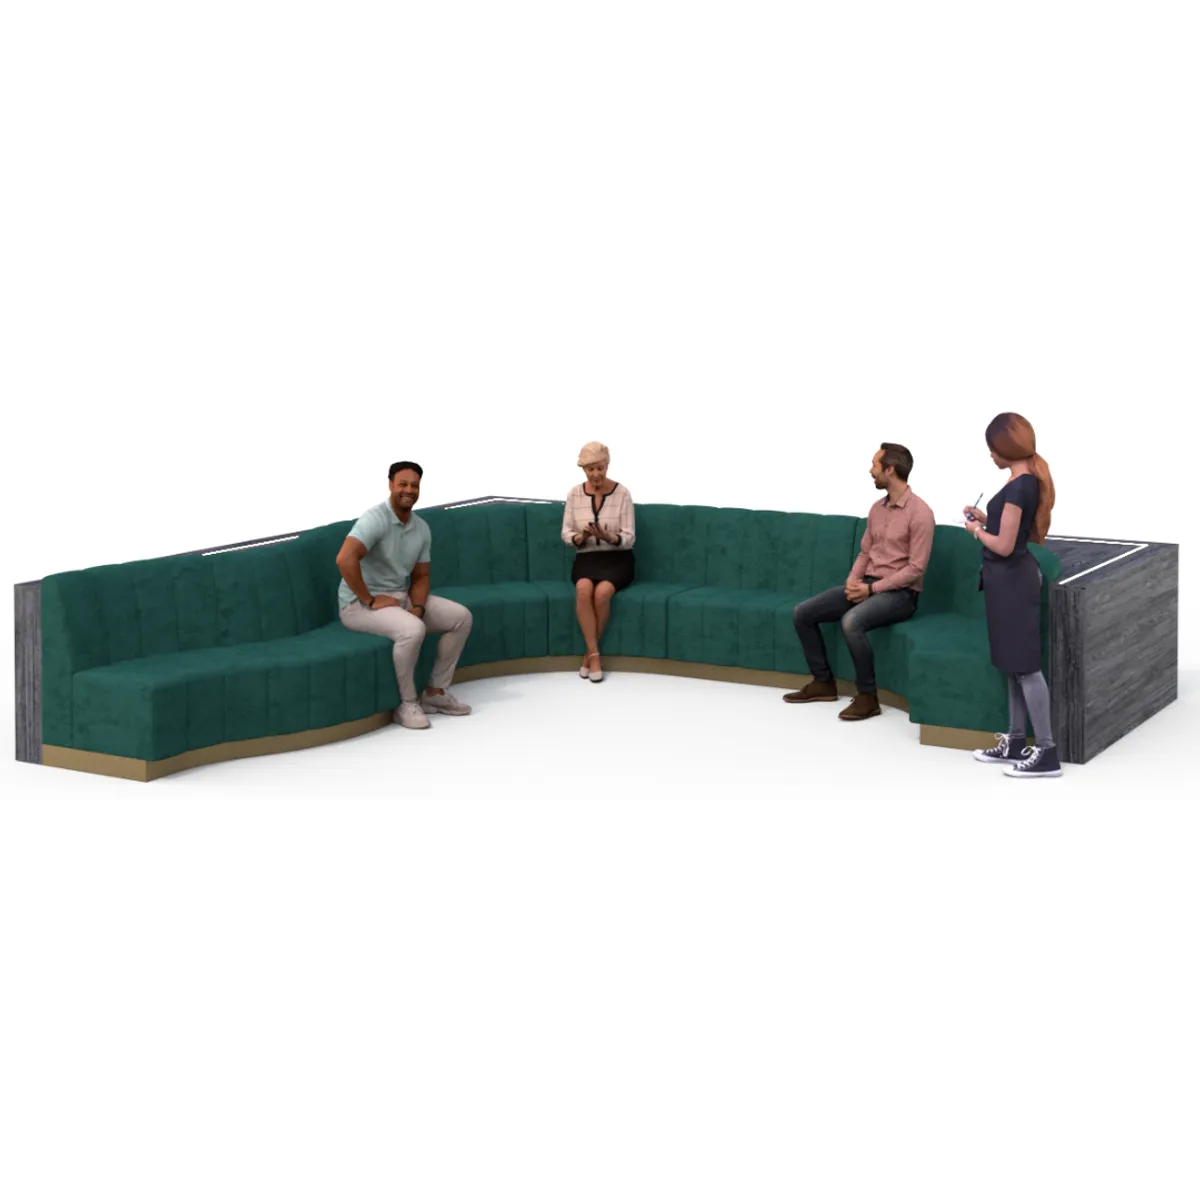 Snake Banquette Seating 10